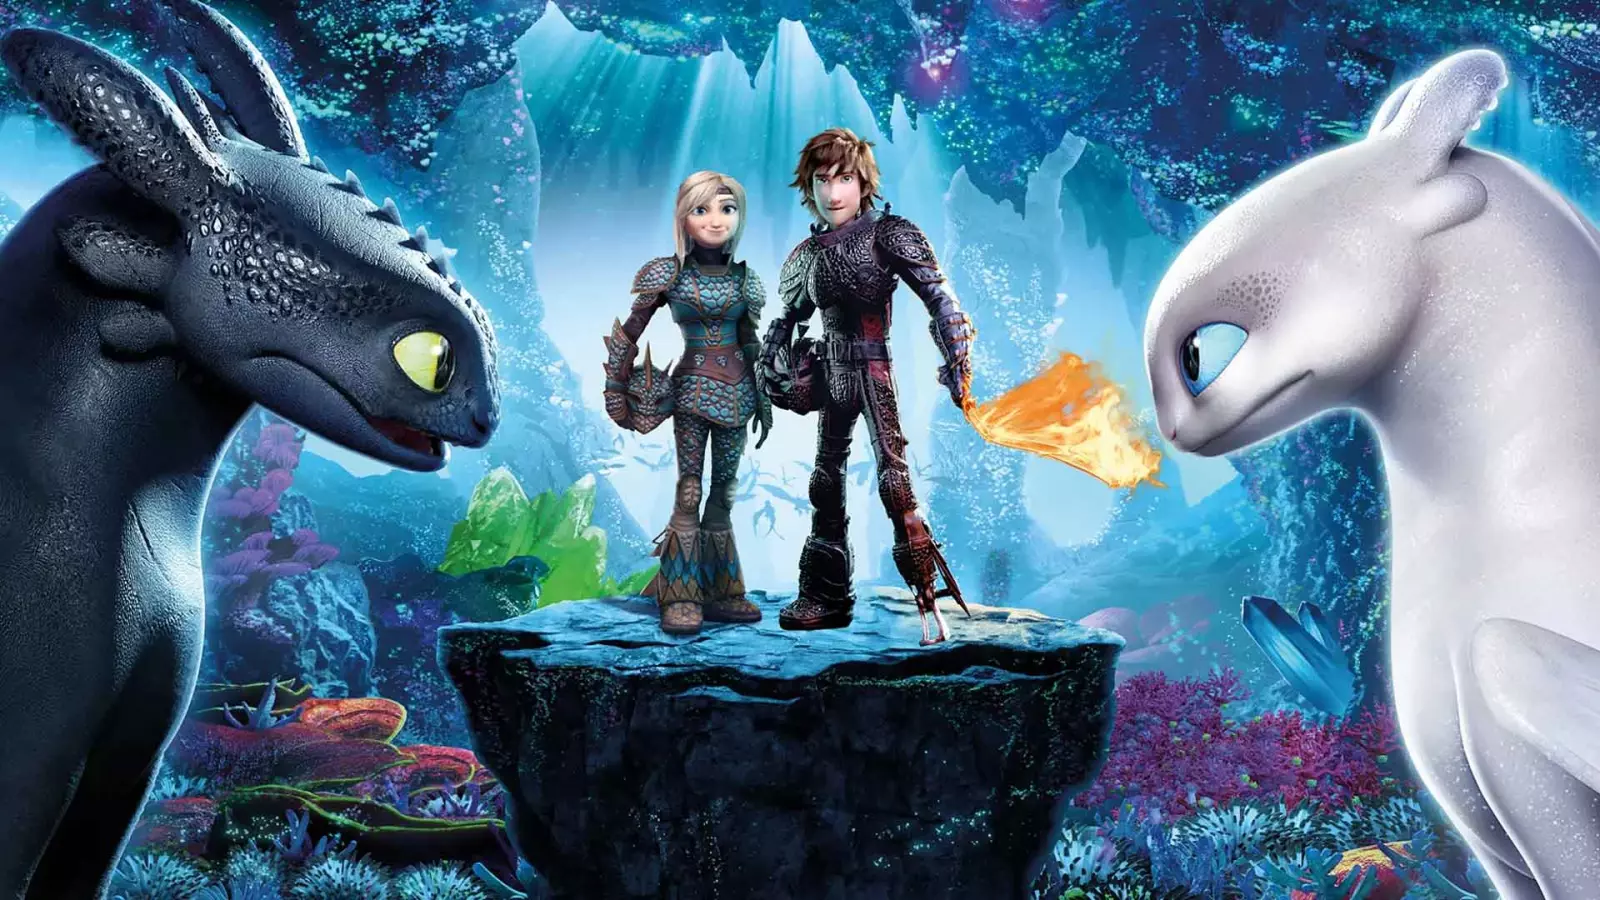 How to Train Your Dragon Homecoming (2019)